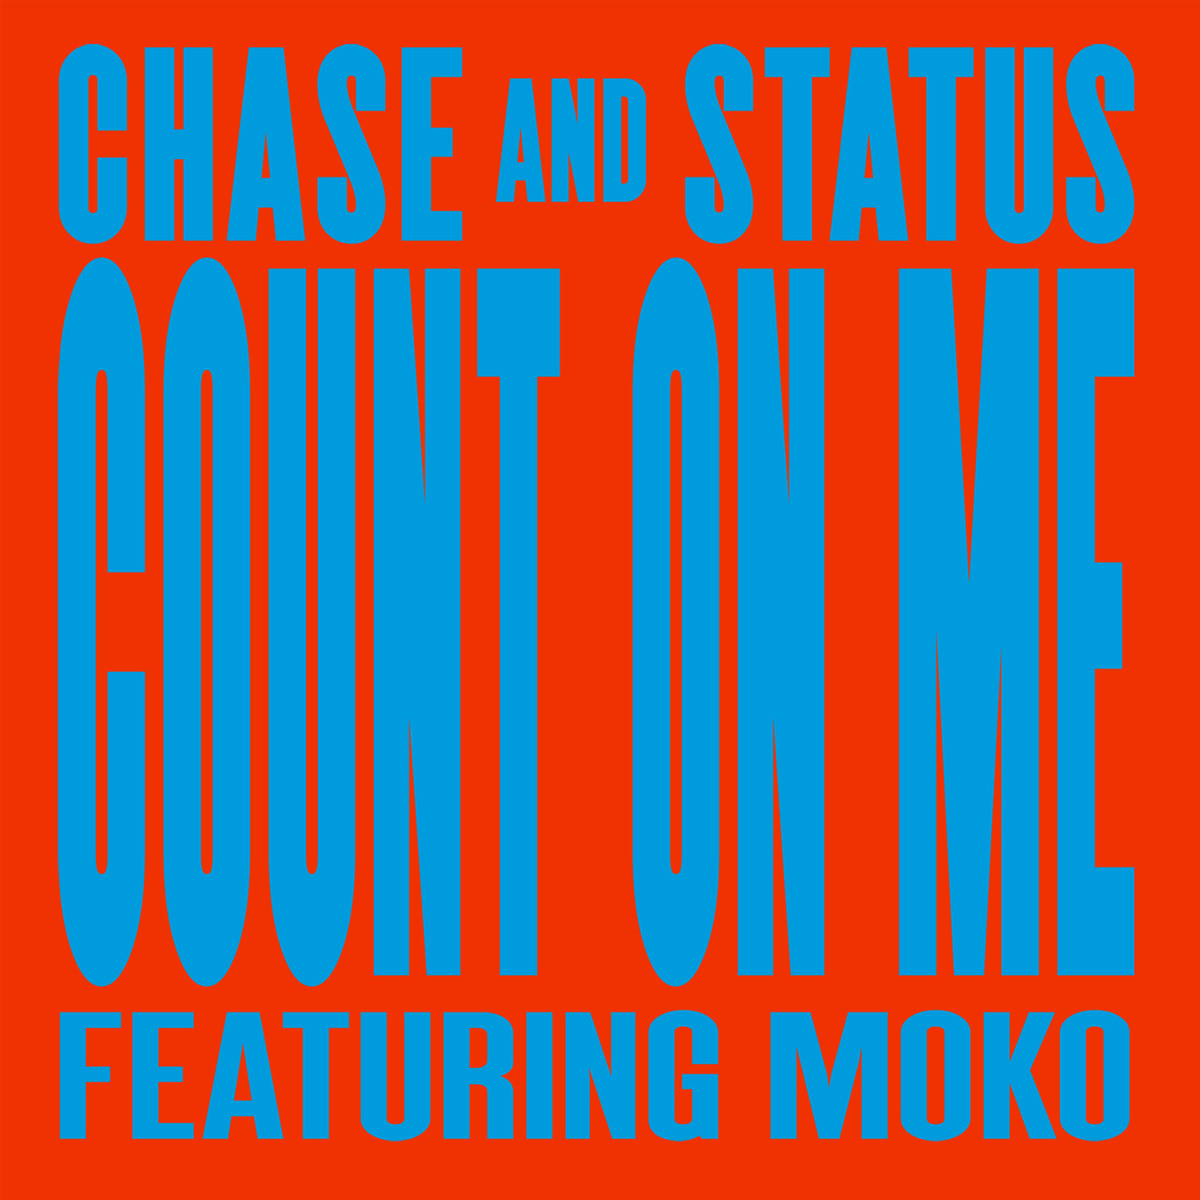 Chase & Status/COUNT ON ME 12"